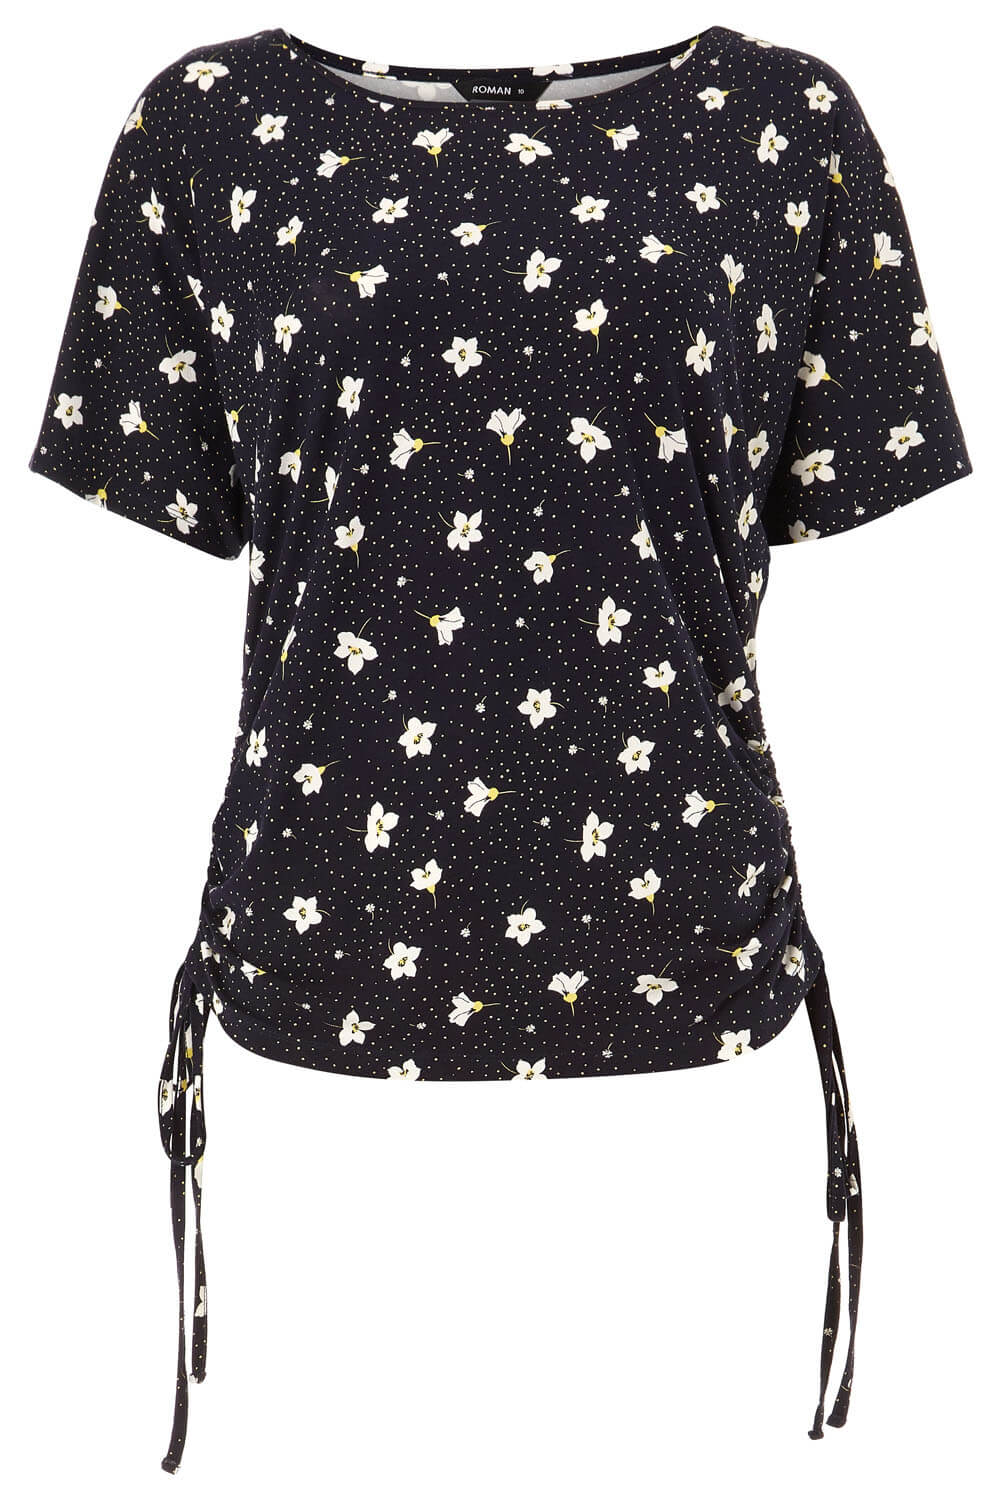 Navy  Floral Spot Print Tie Side Top, Image 5 of 5